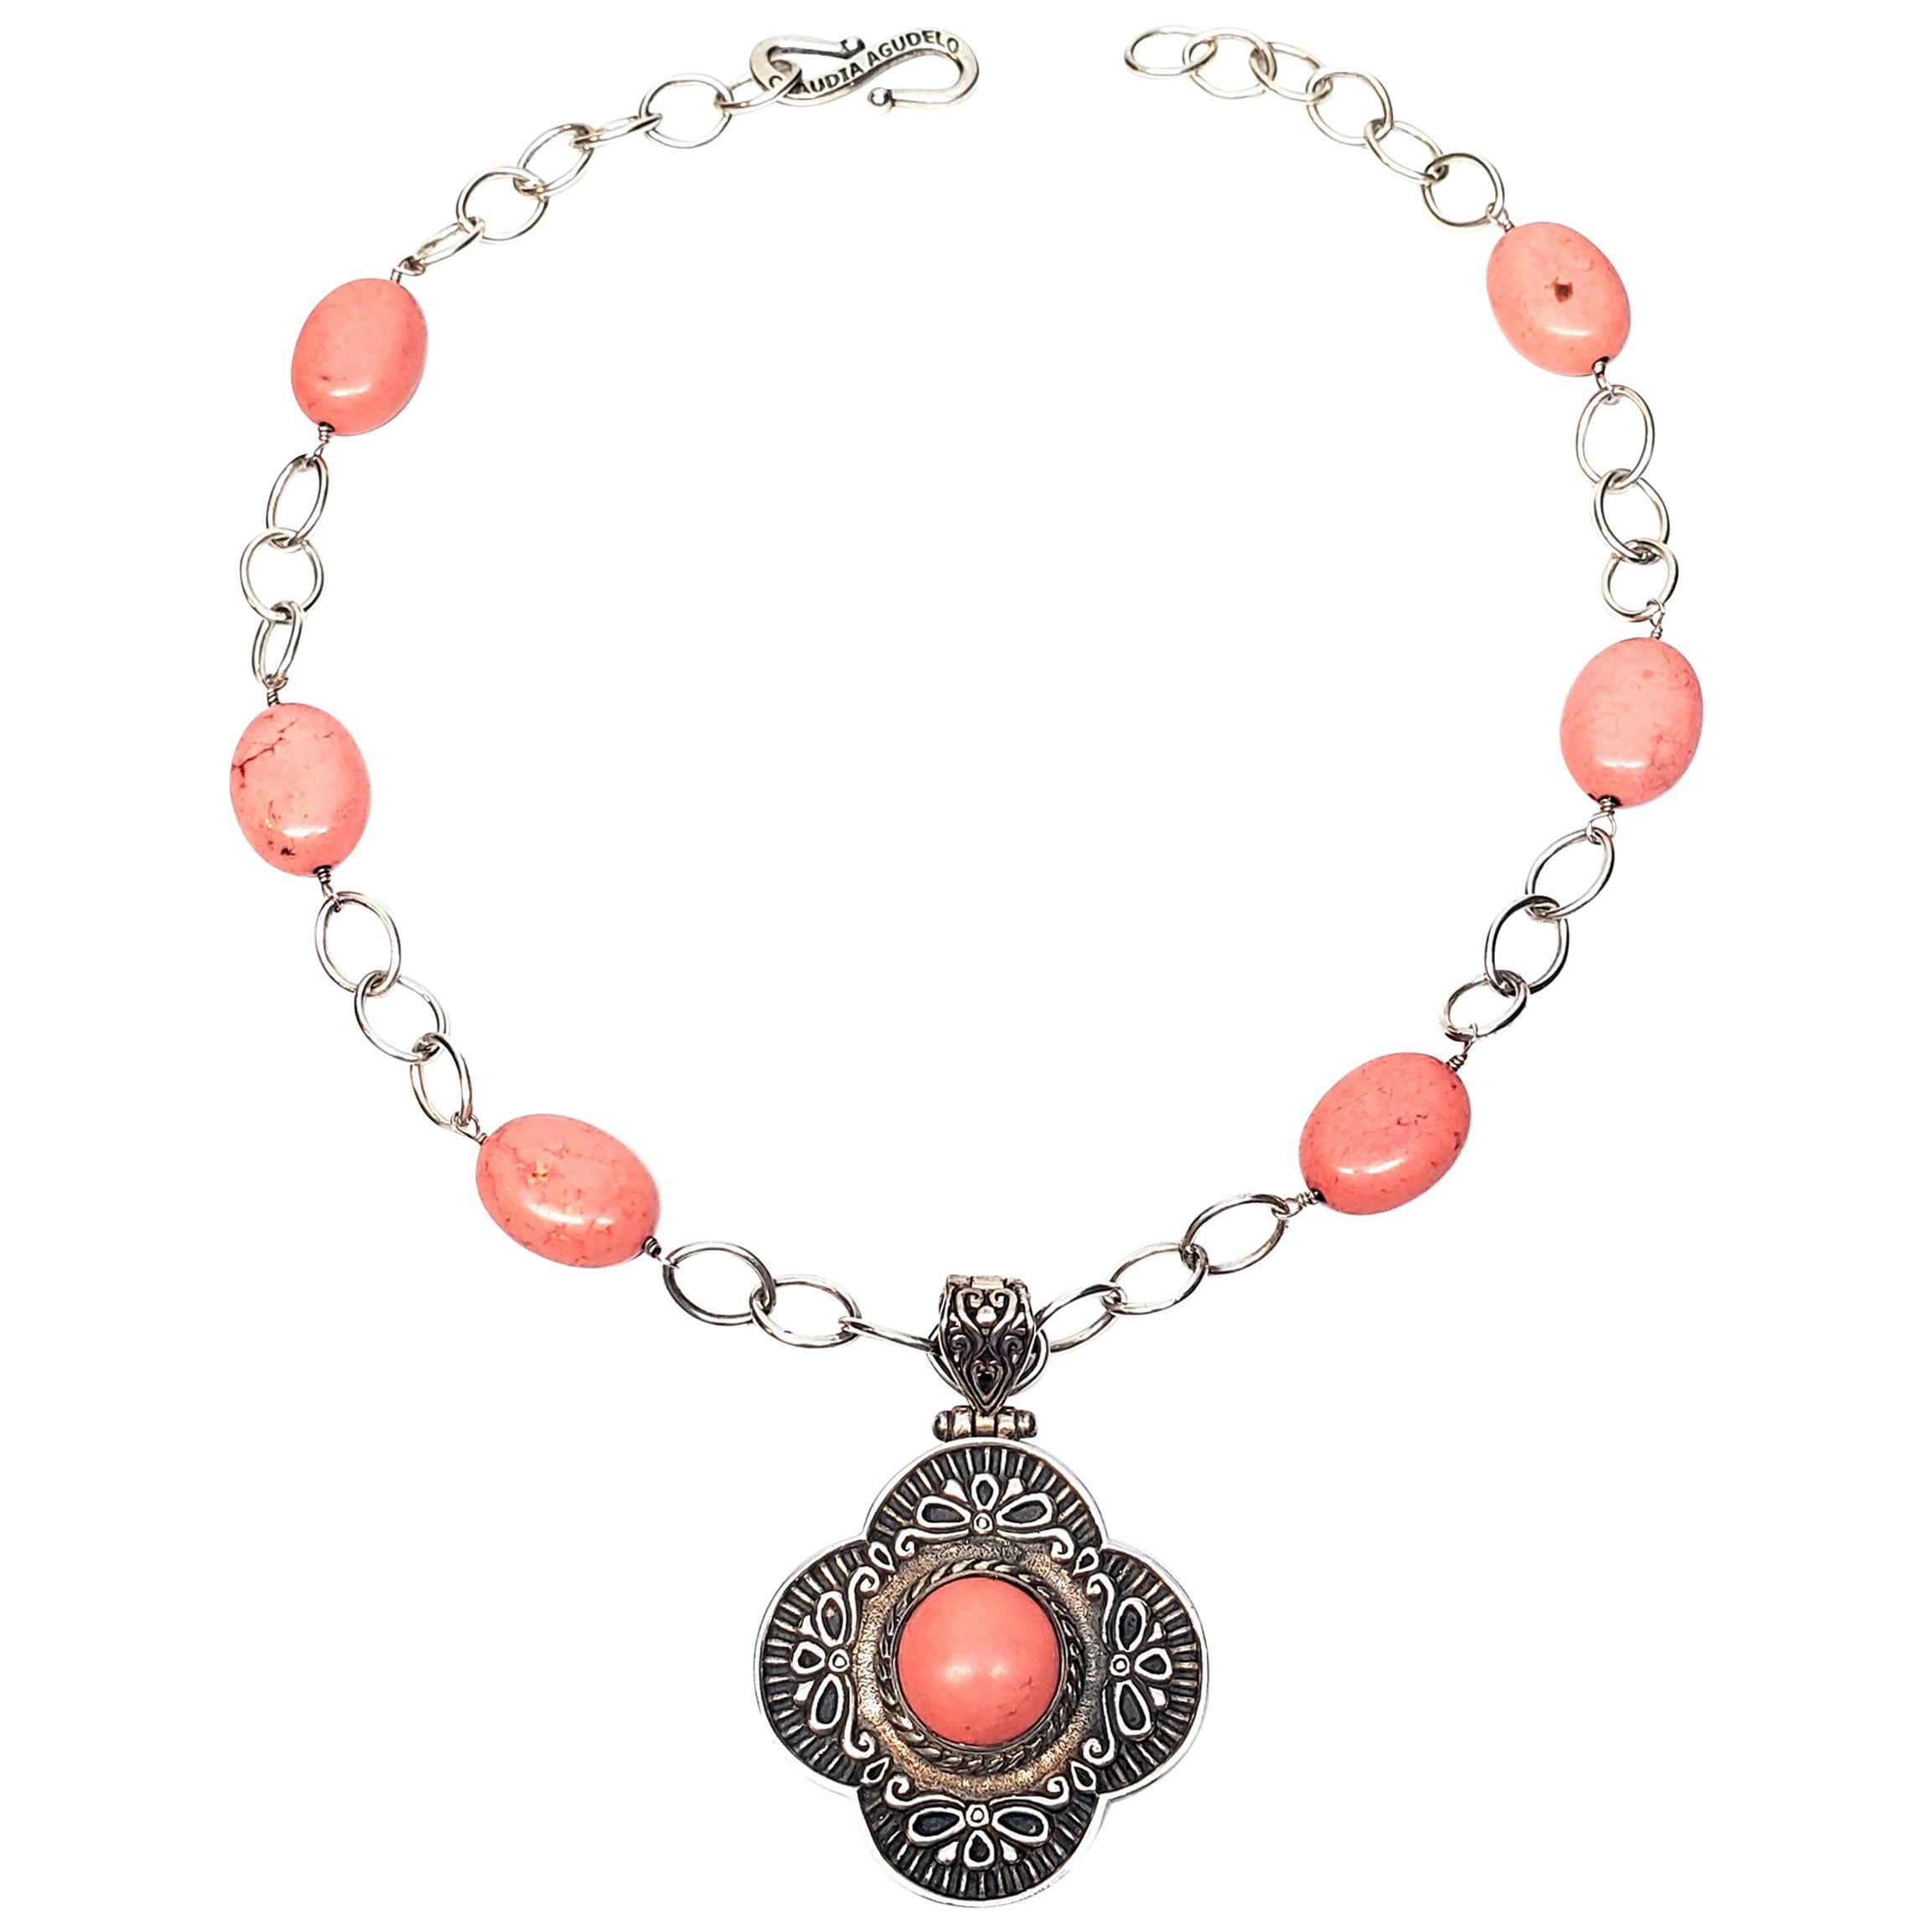 Claudia Agudelo EXEX Sterl Silver and Pink Stone Necklace with Enhancer